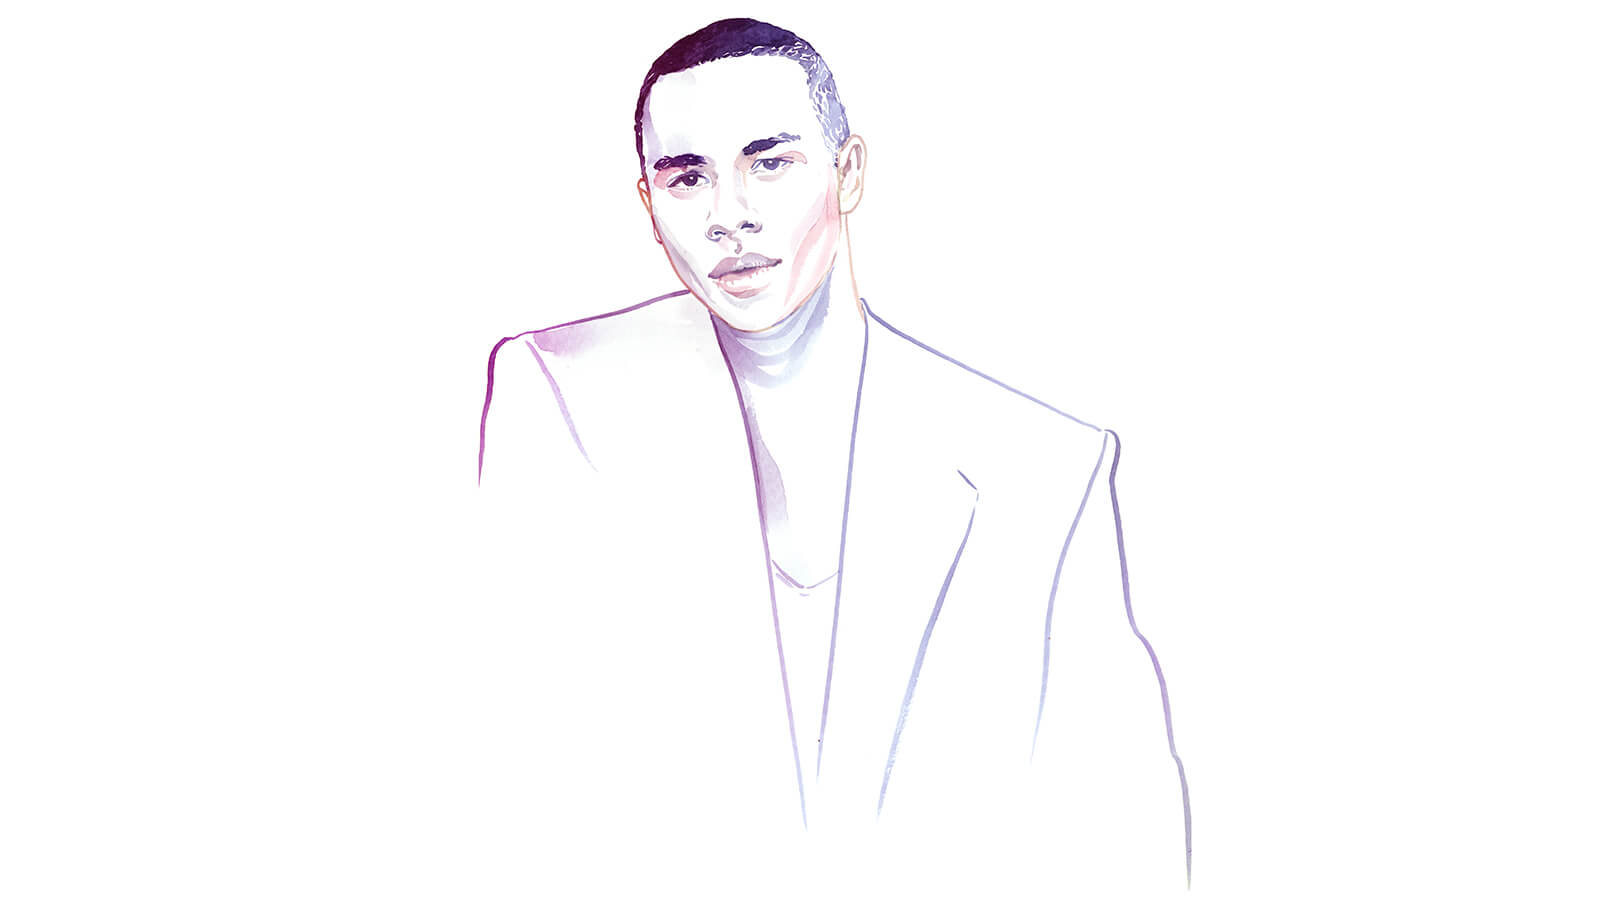 Watercolour illustrated portrait of French fashion designer Olivier Rousteing, wearing suit jacket